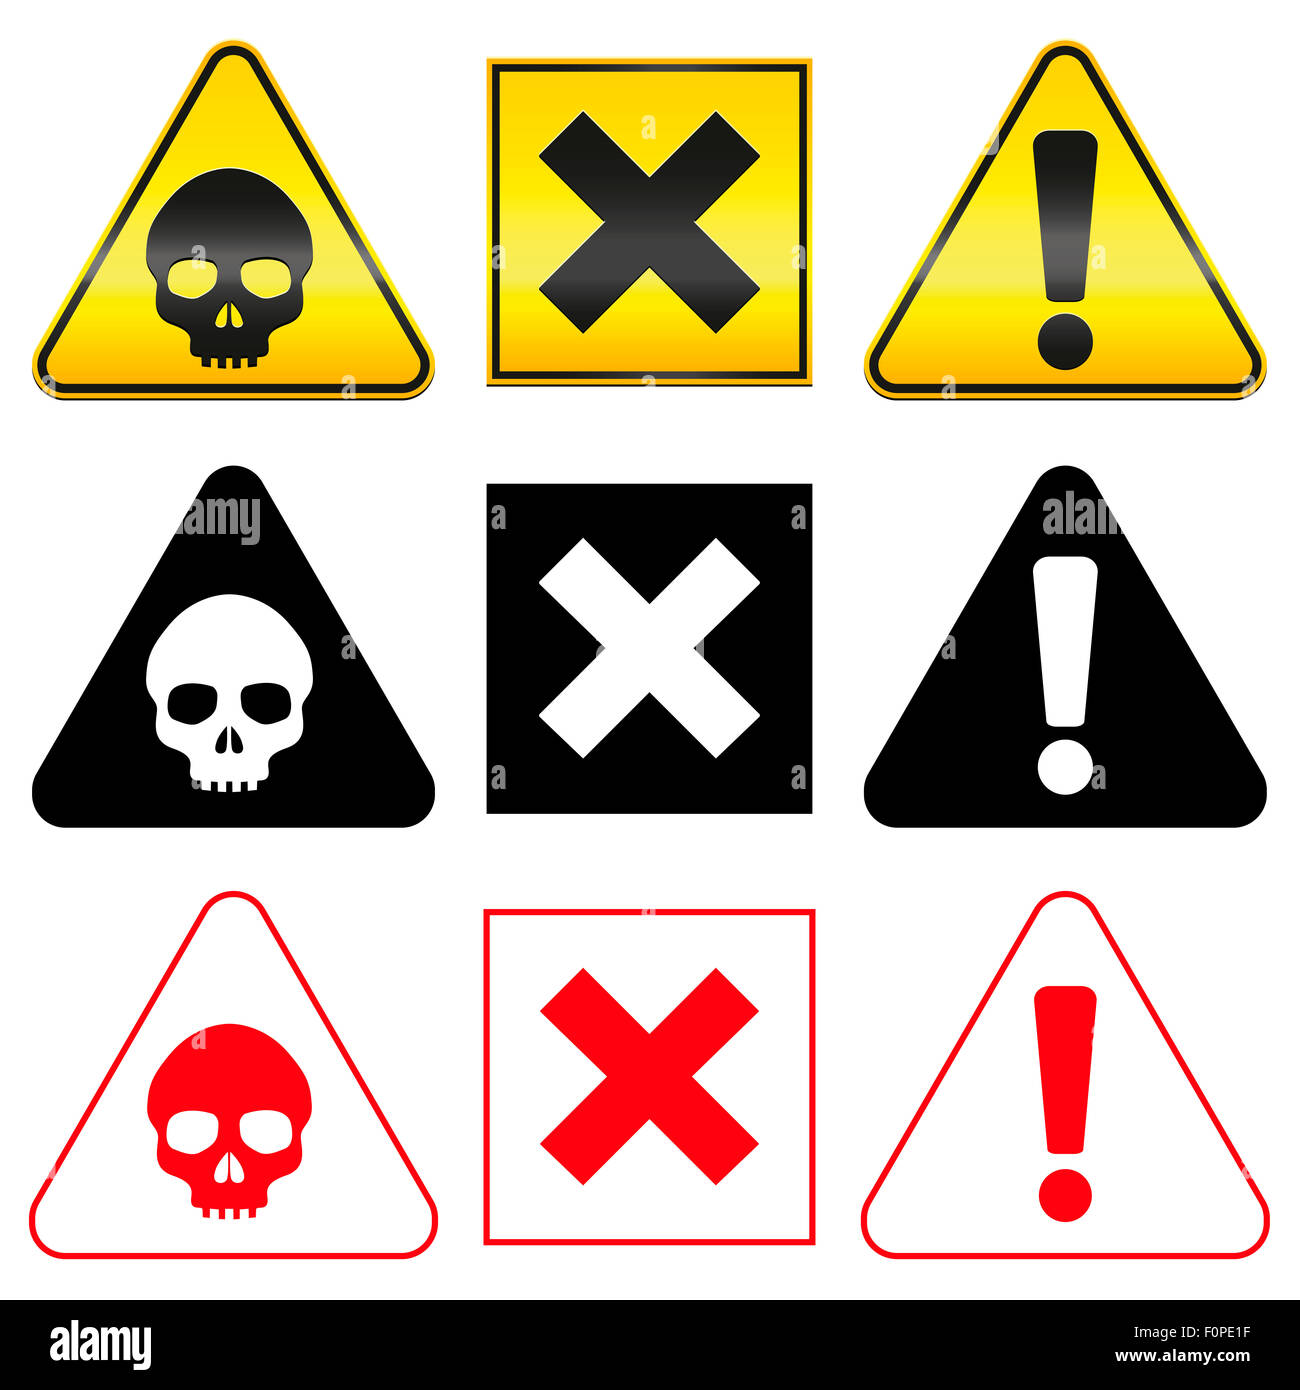 6 x Toxic-Warning Symbol Stickers-Health & Safety Caution Notices Skull Signs . 